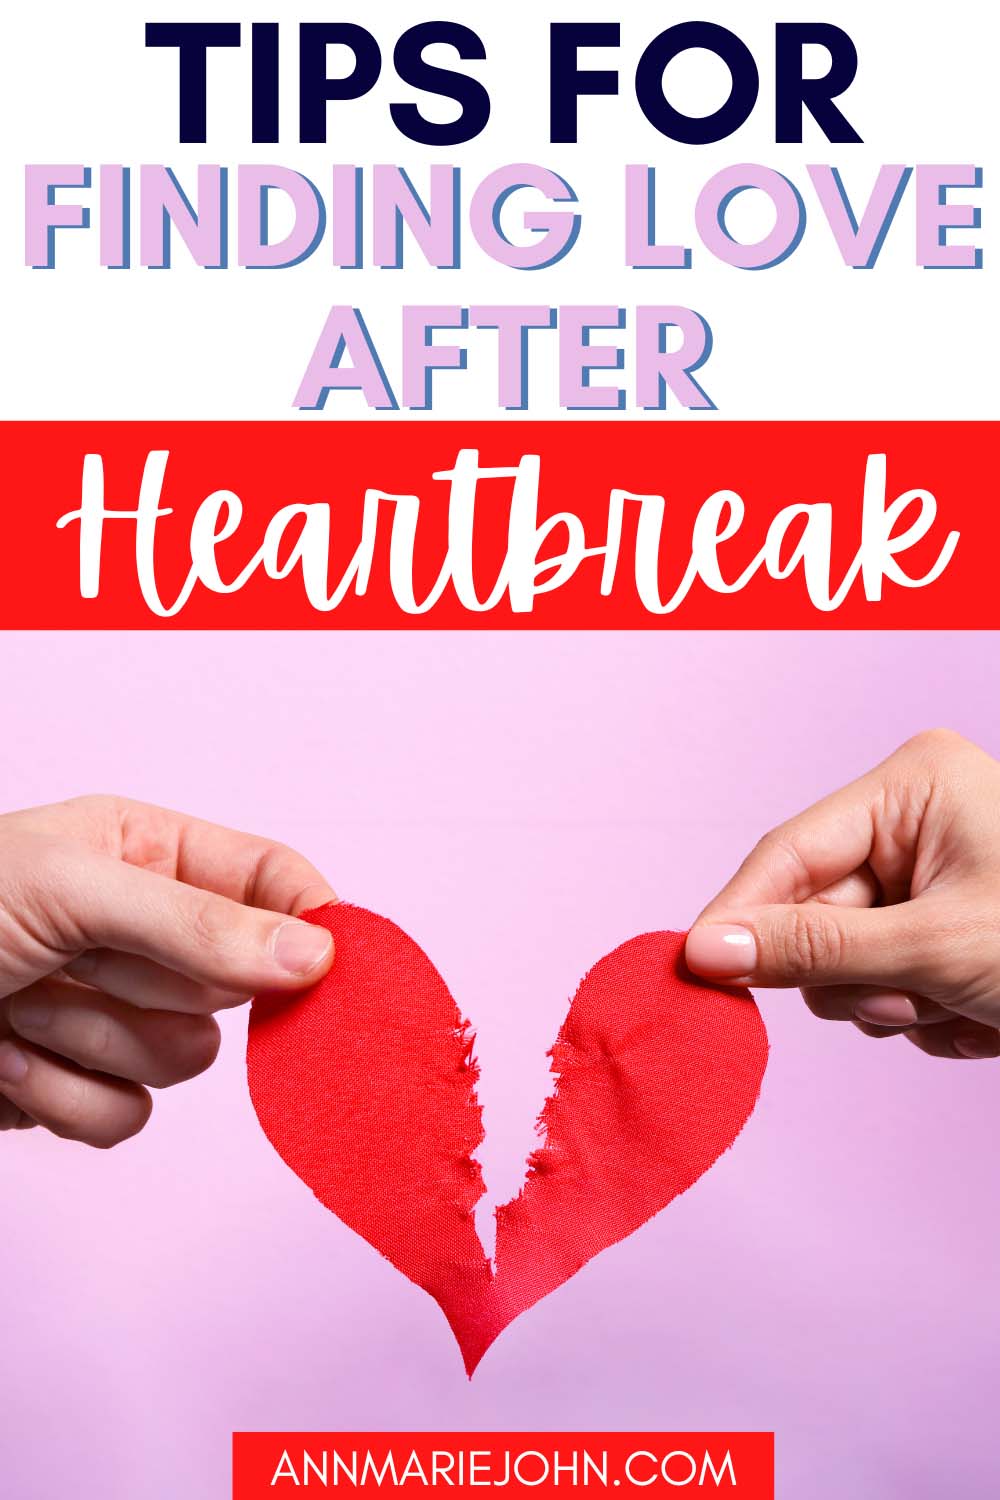 Tips for Finding Love After Heartbreak